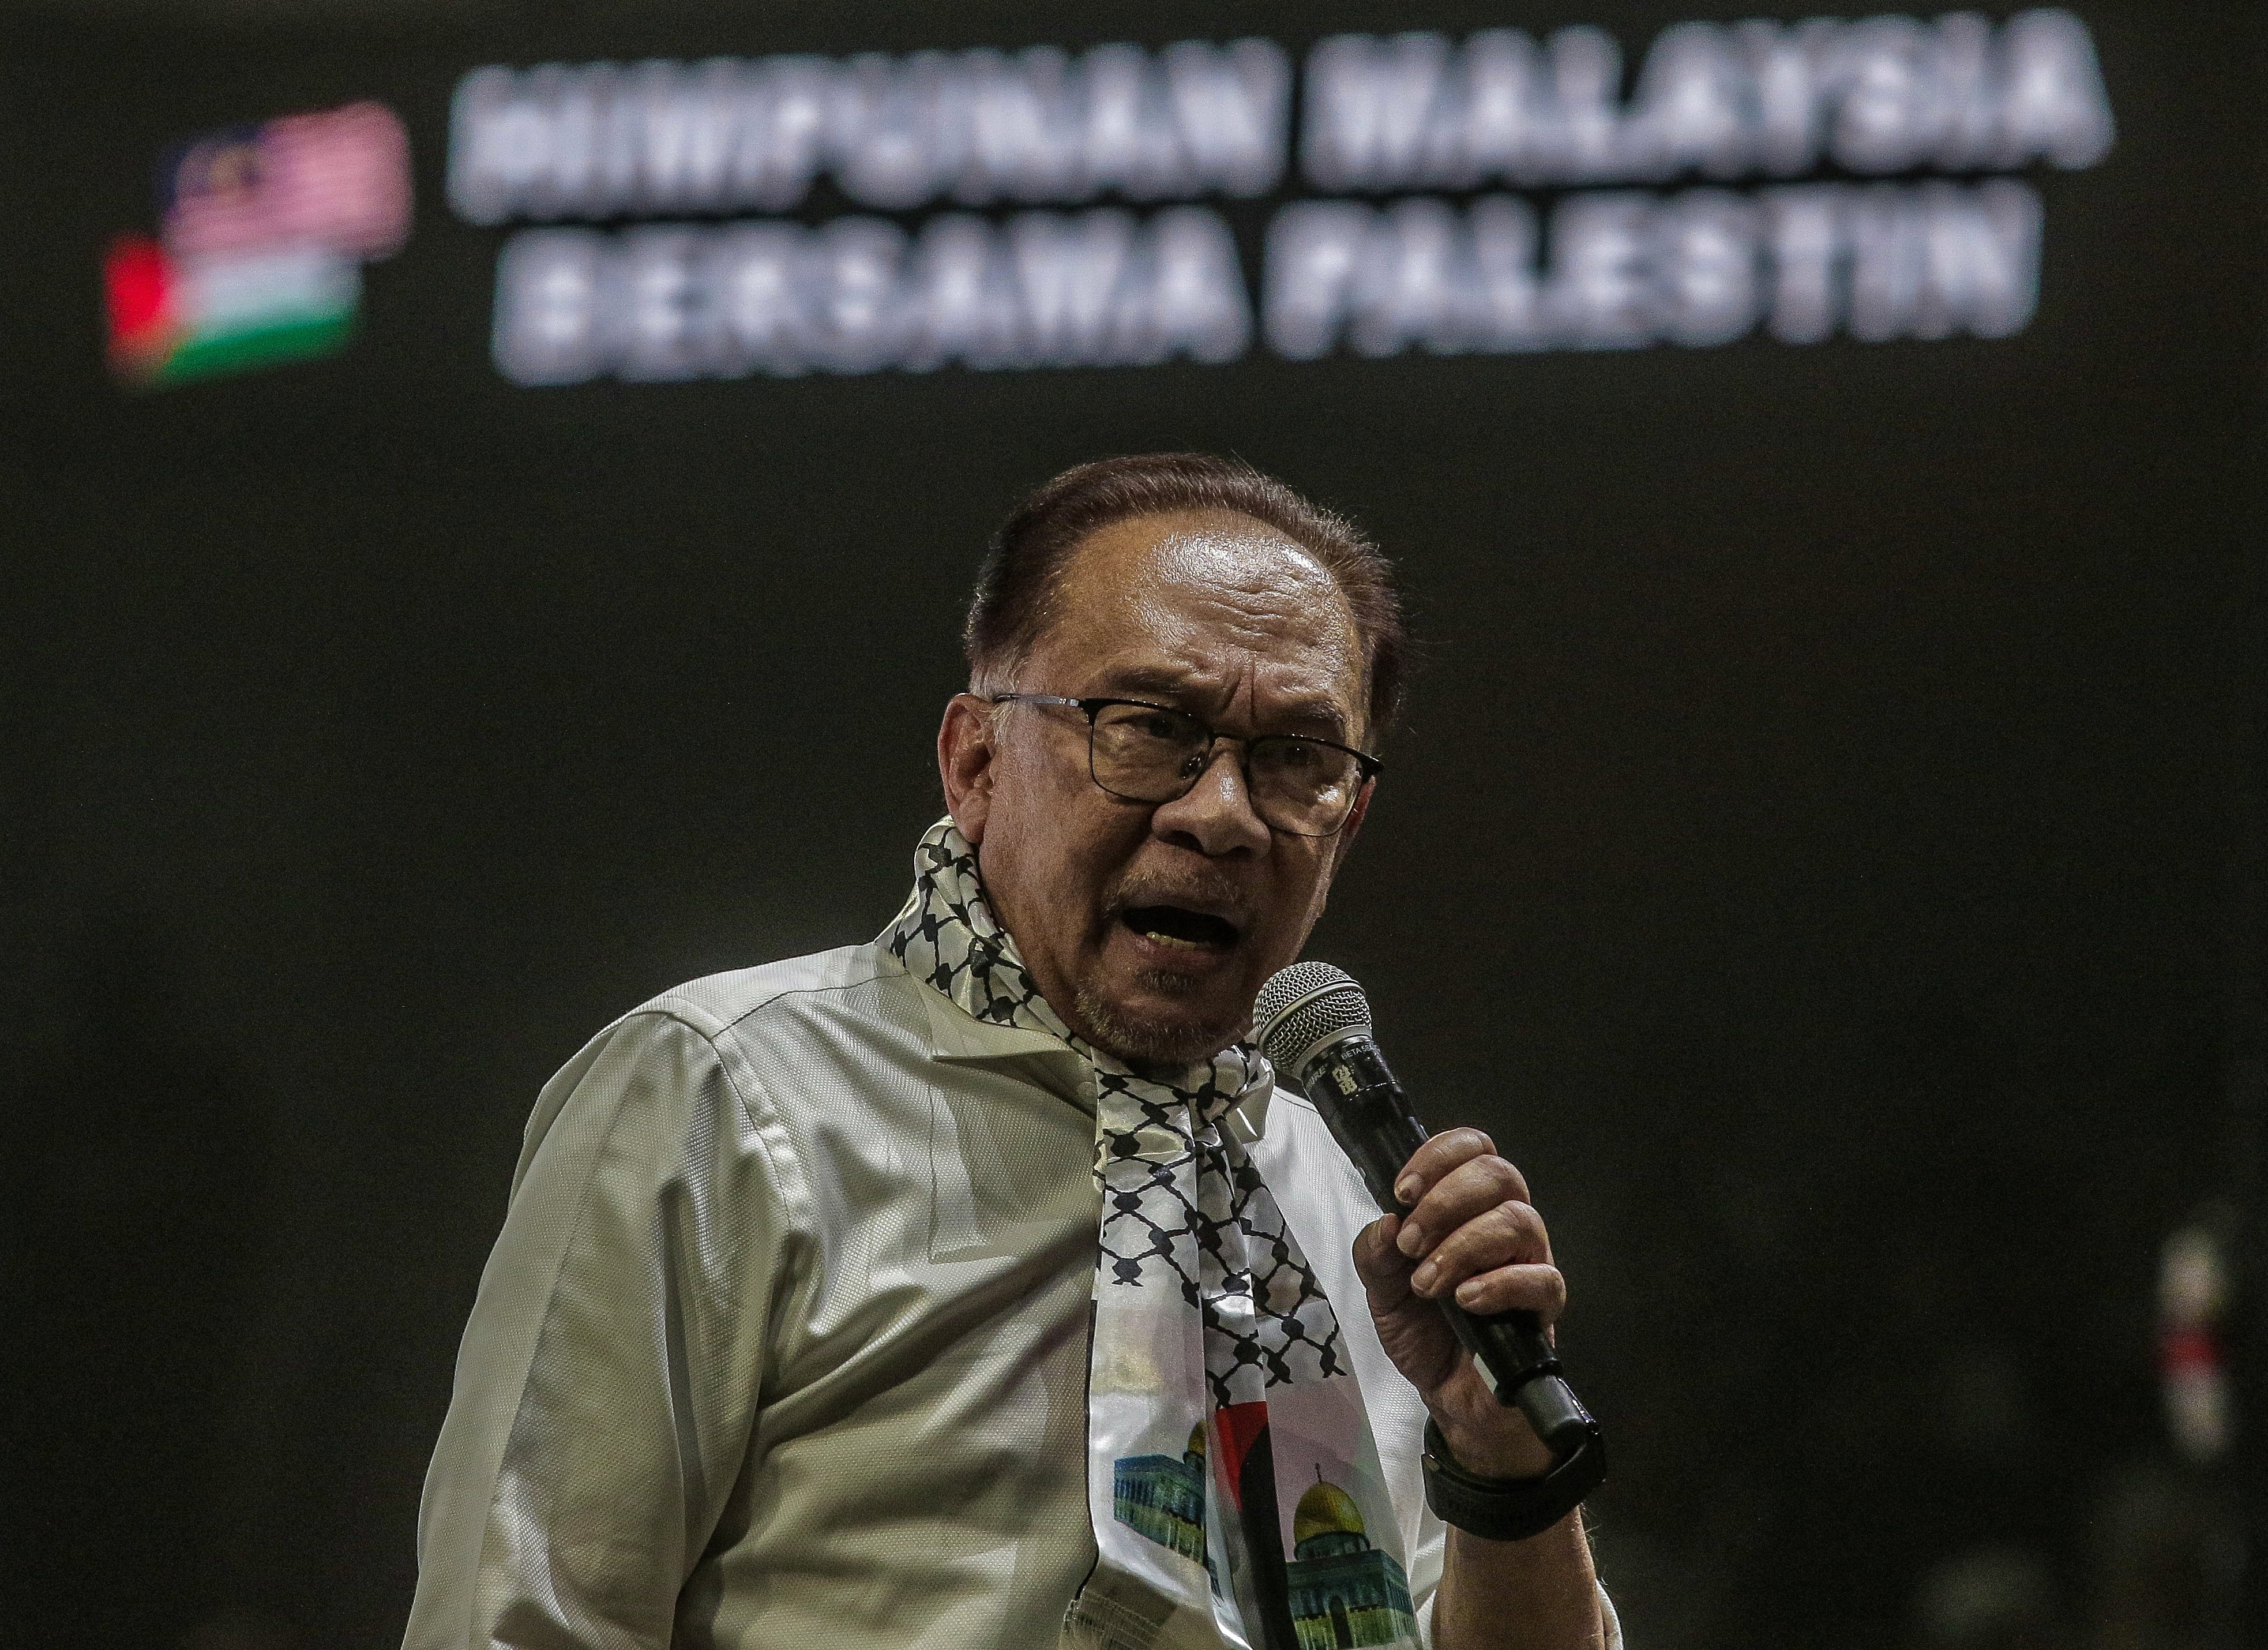 Prime Minister Anwar Ibrahim speaks at the ‘Malaysia Stands with Palestine’ rally in Kuala Lumpur on October 24. Photo: EPA-EFE